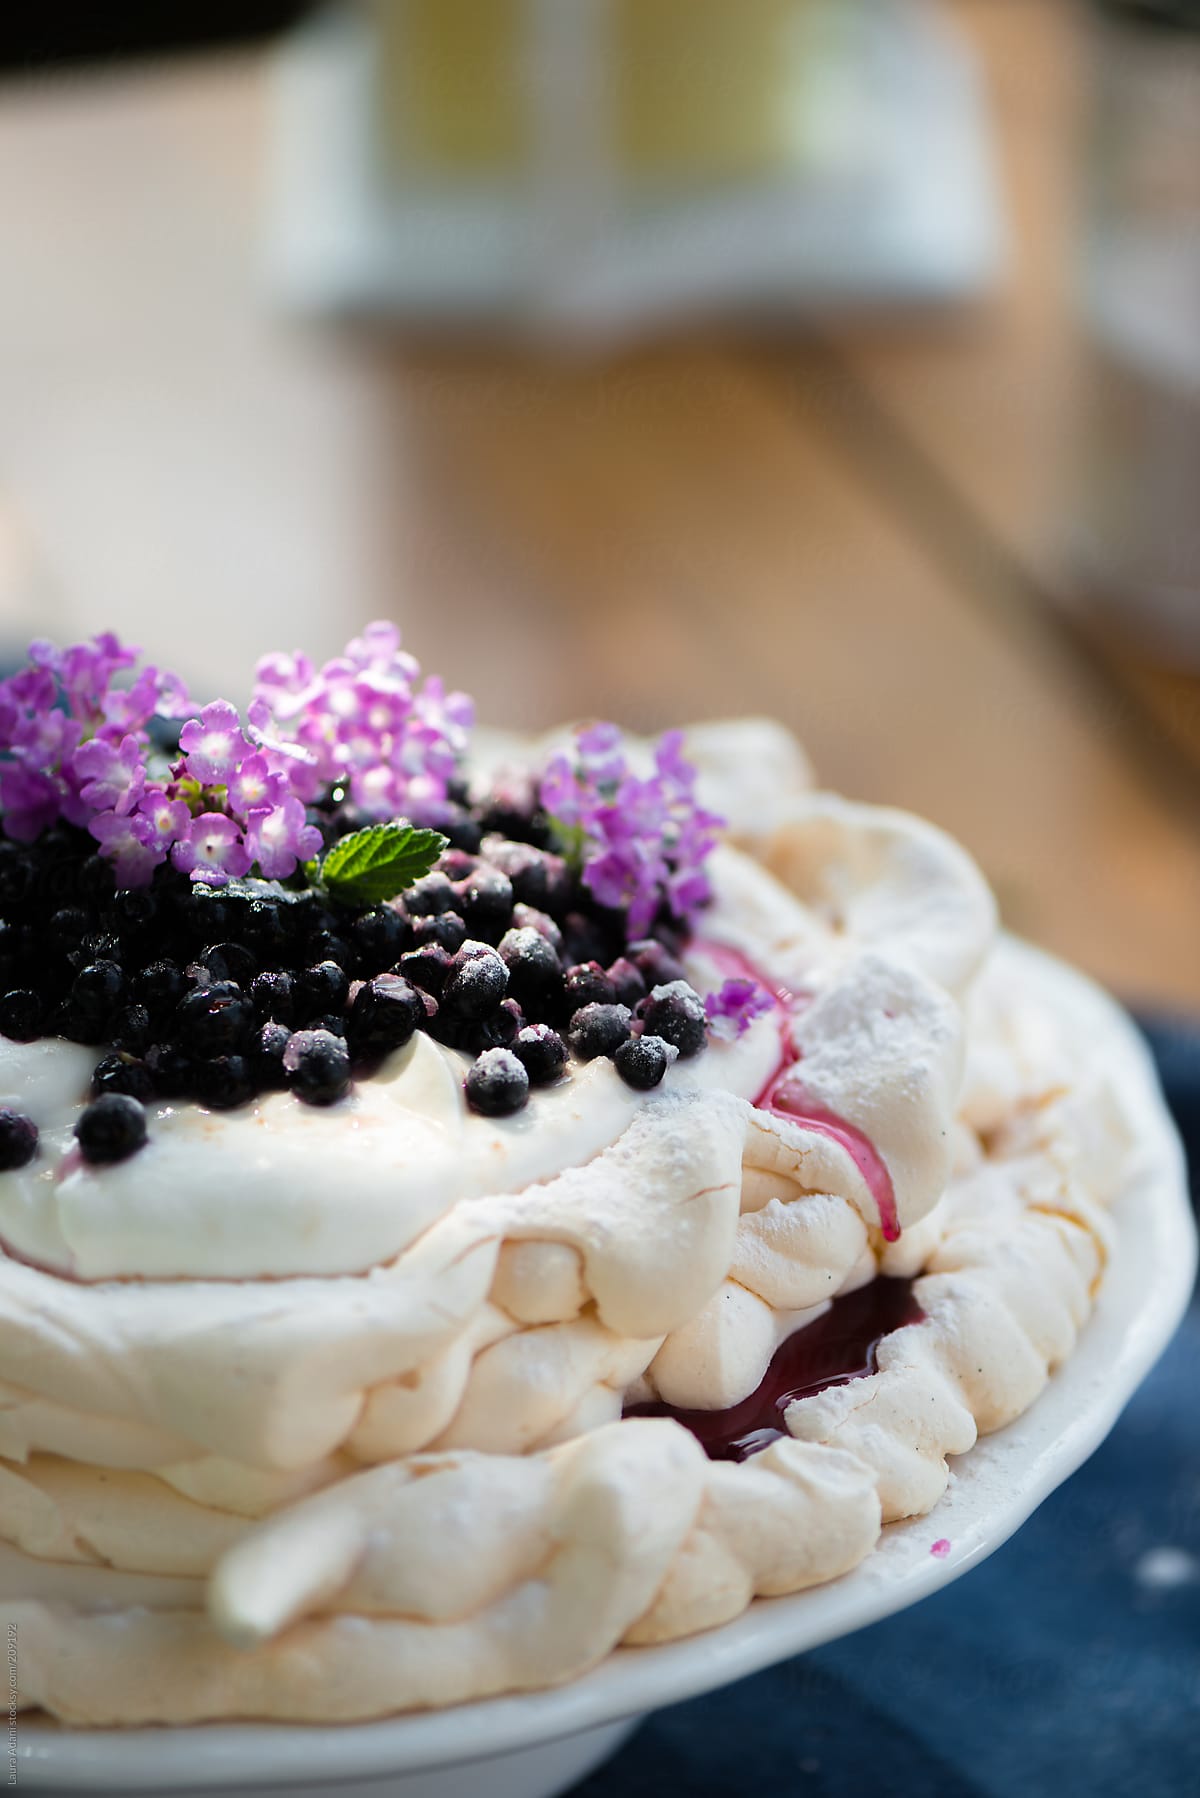 pavlova with blueberries and whipped cream